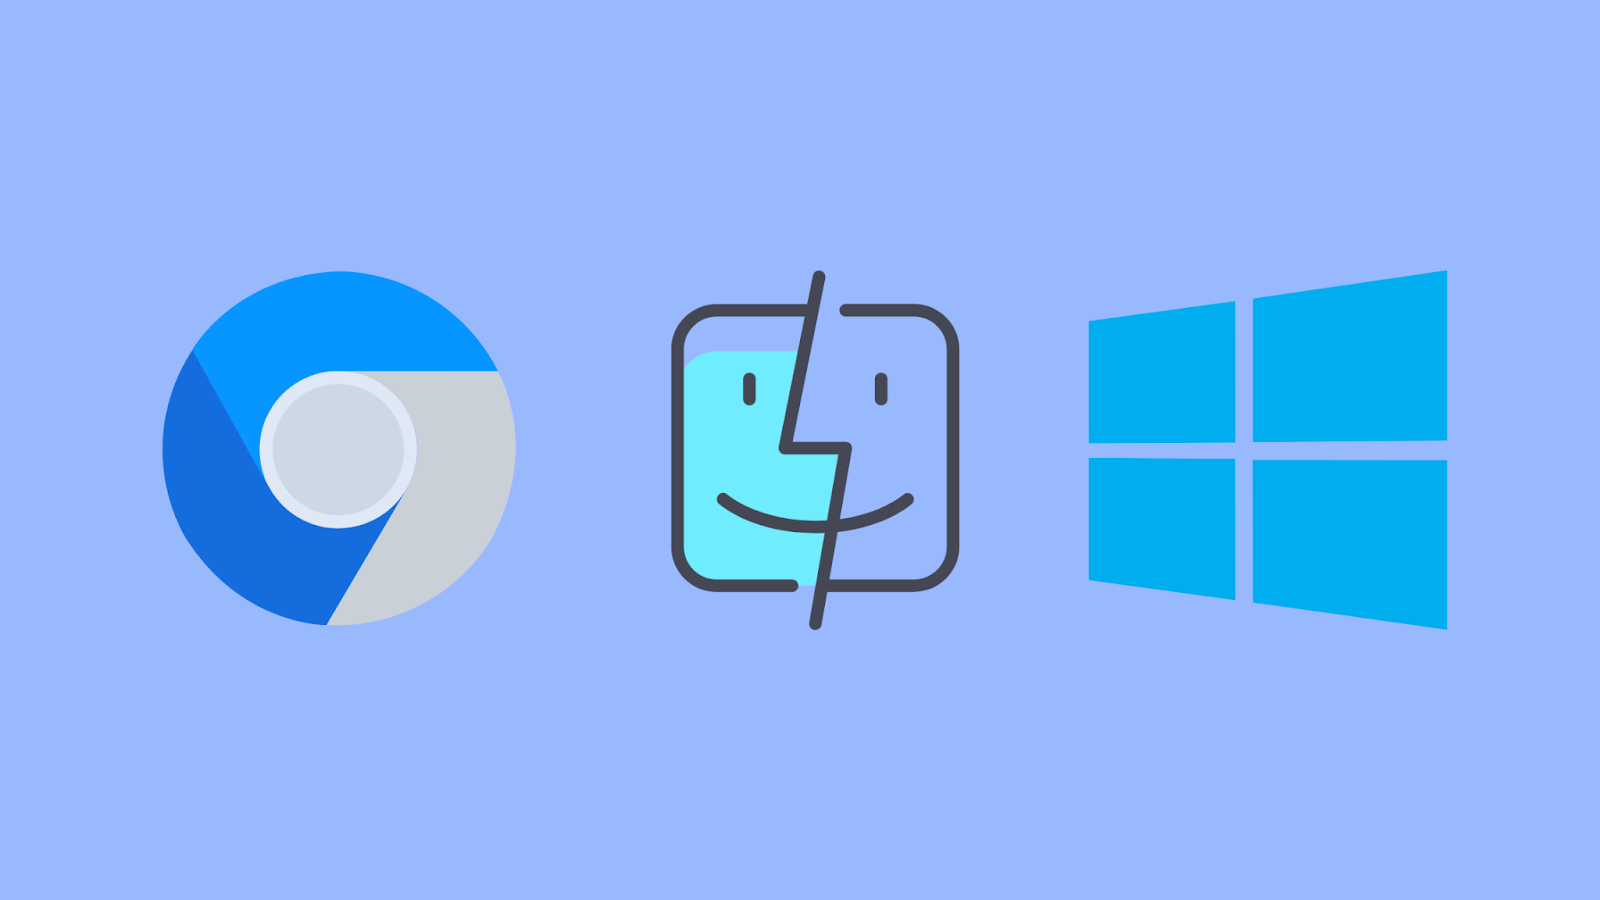 Built-In Protection for Windows, Mac, and Chromebook